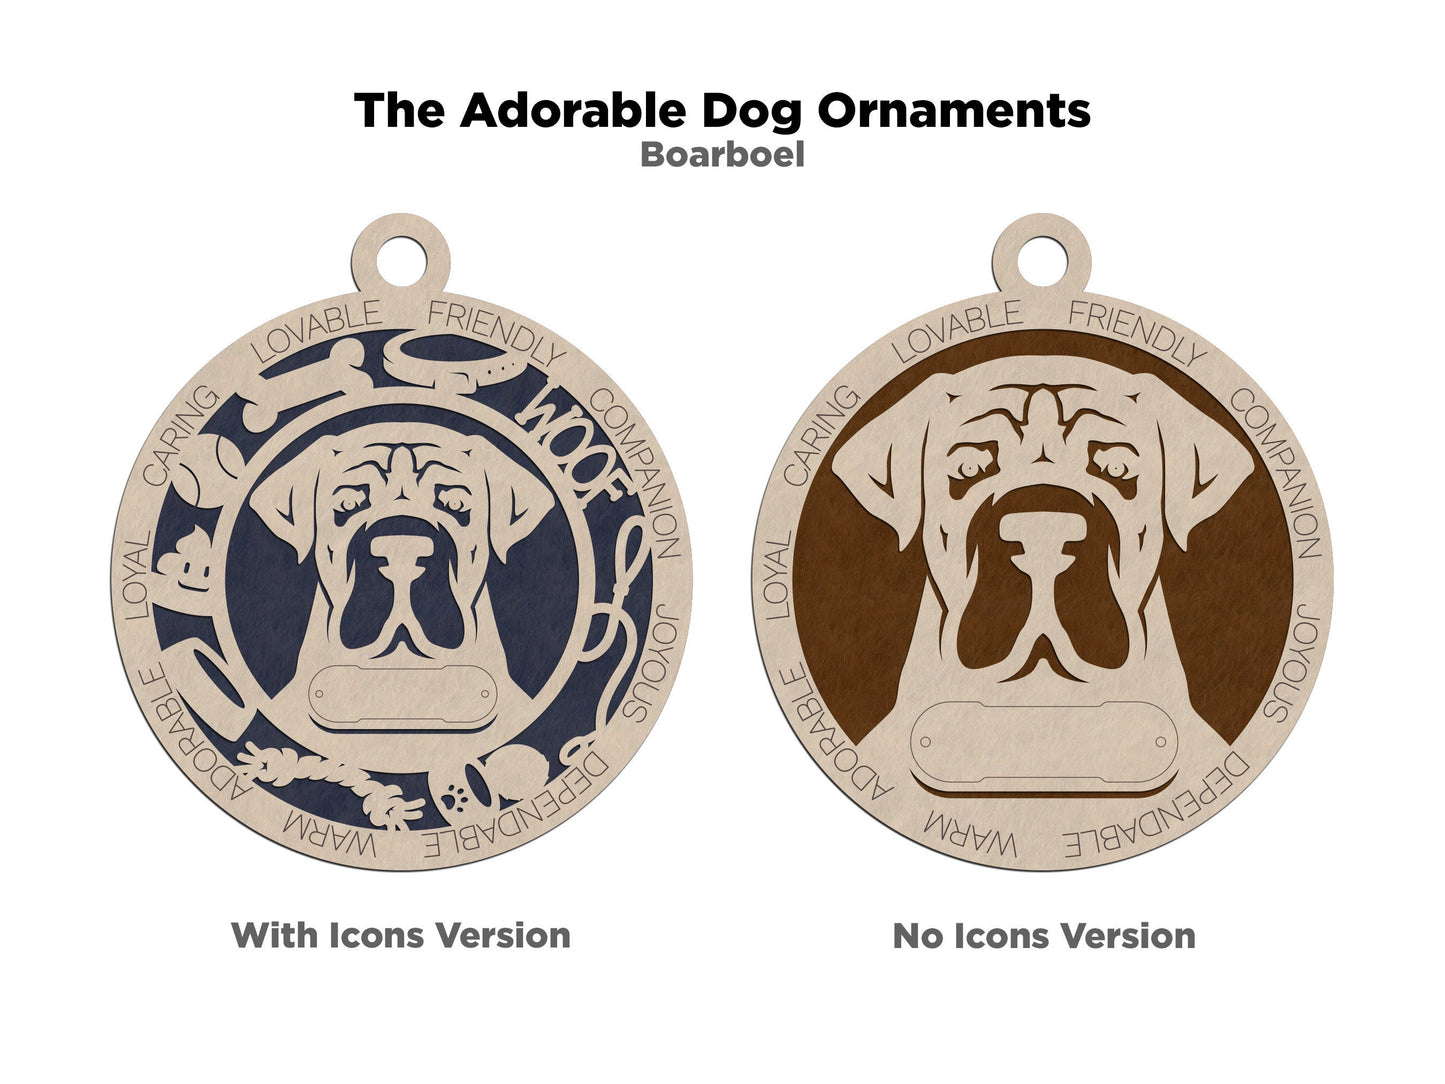 Boarboel - Adorable Dog Ornaments - 2 Ornaments included - SVG, PDF, AI File Download - Sized for Glowforge